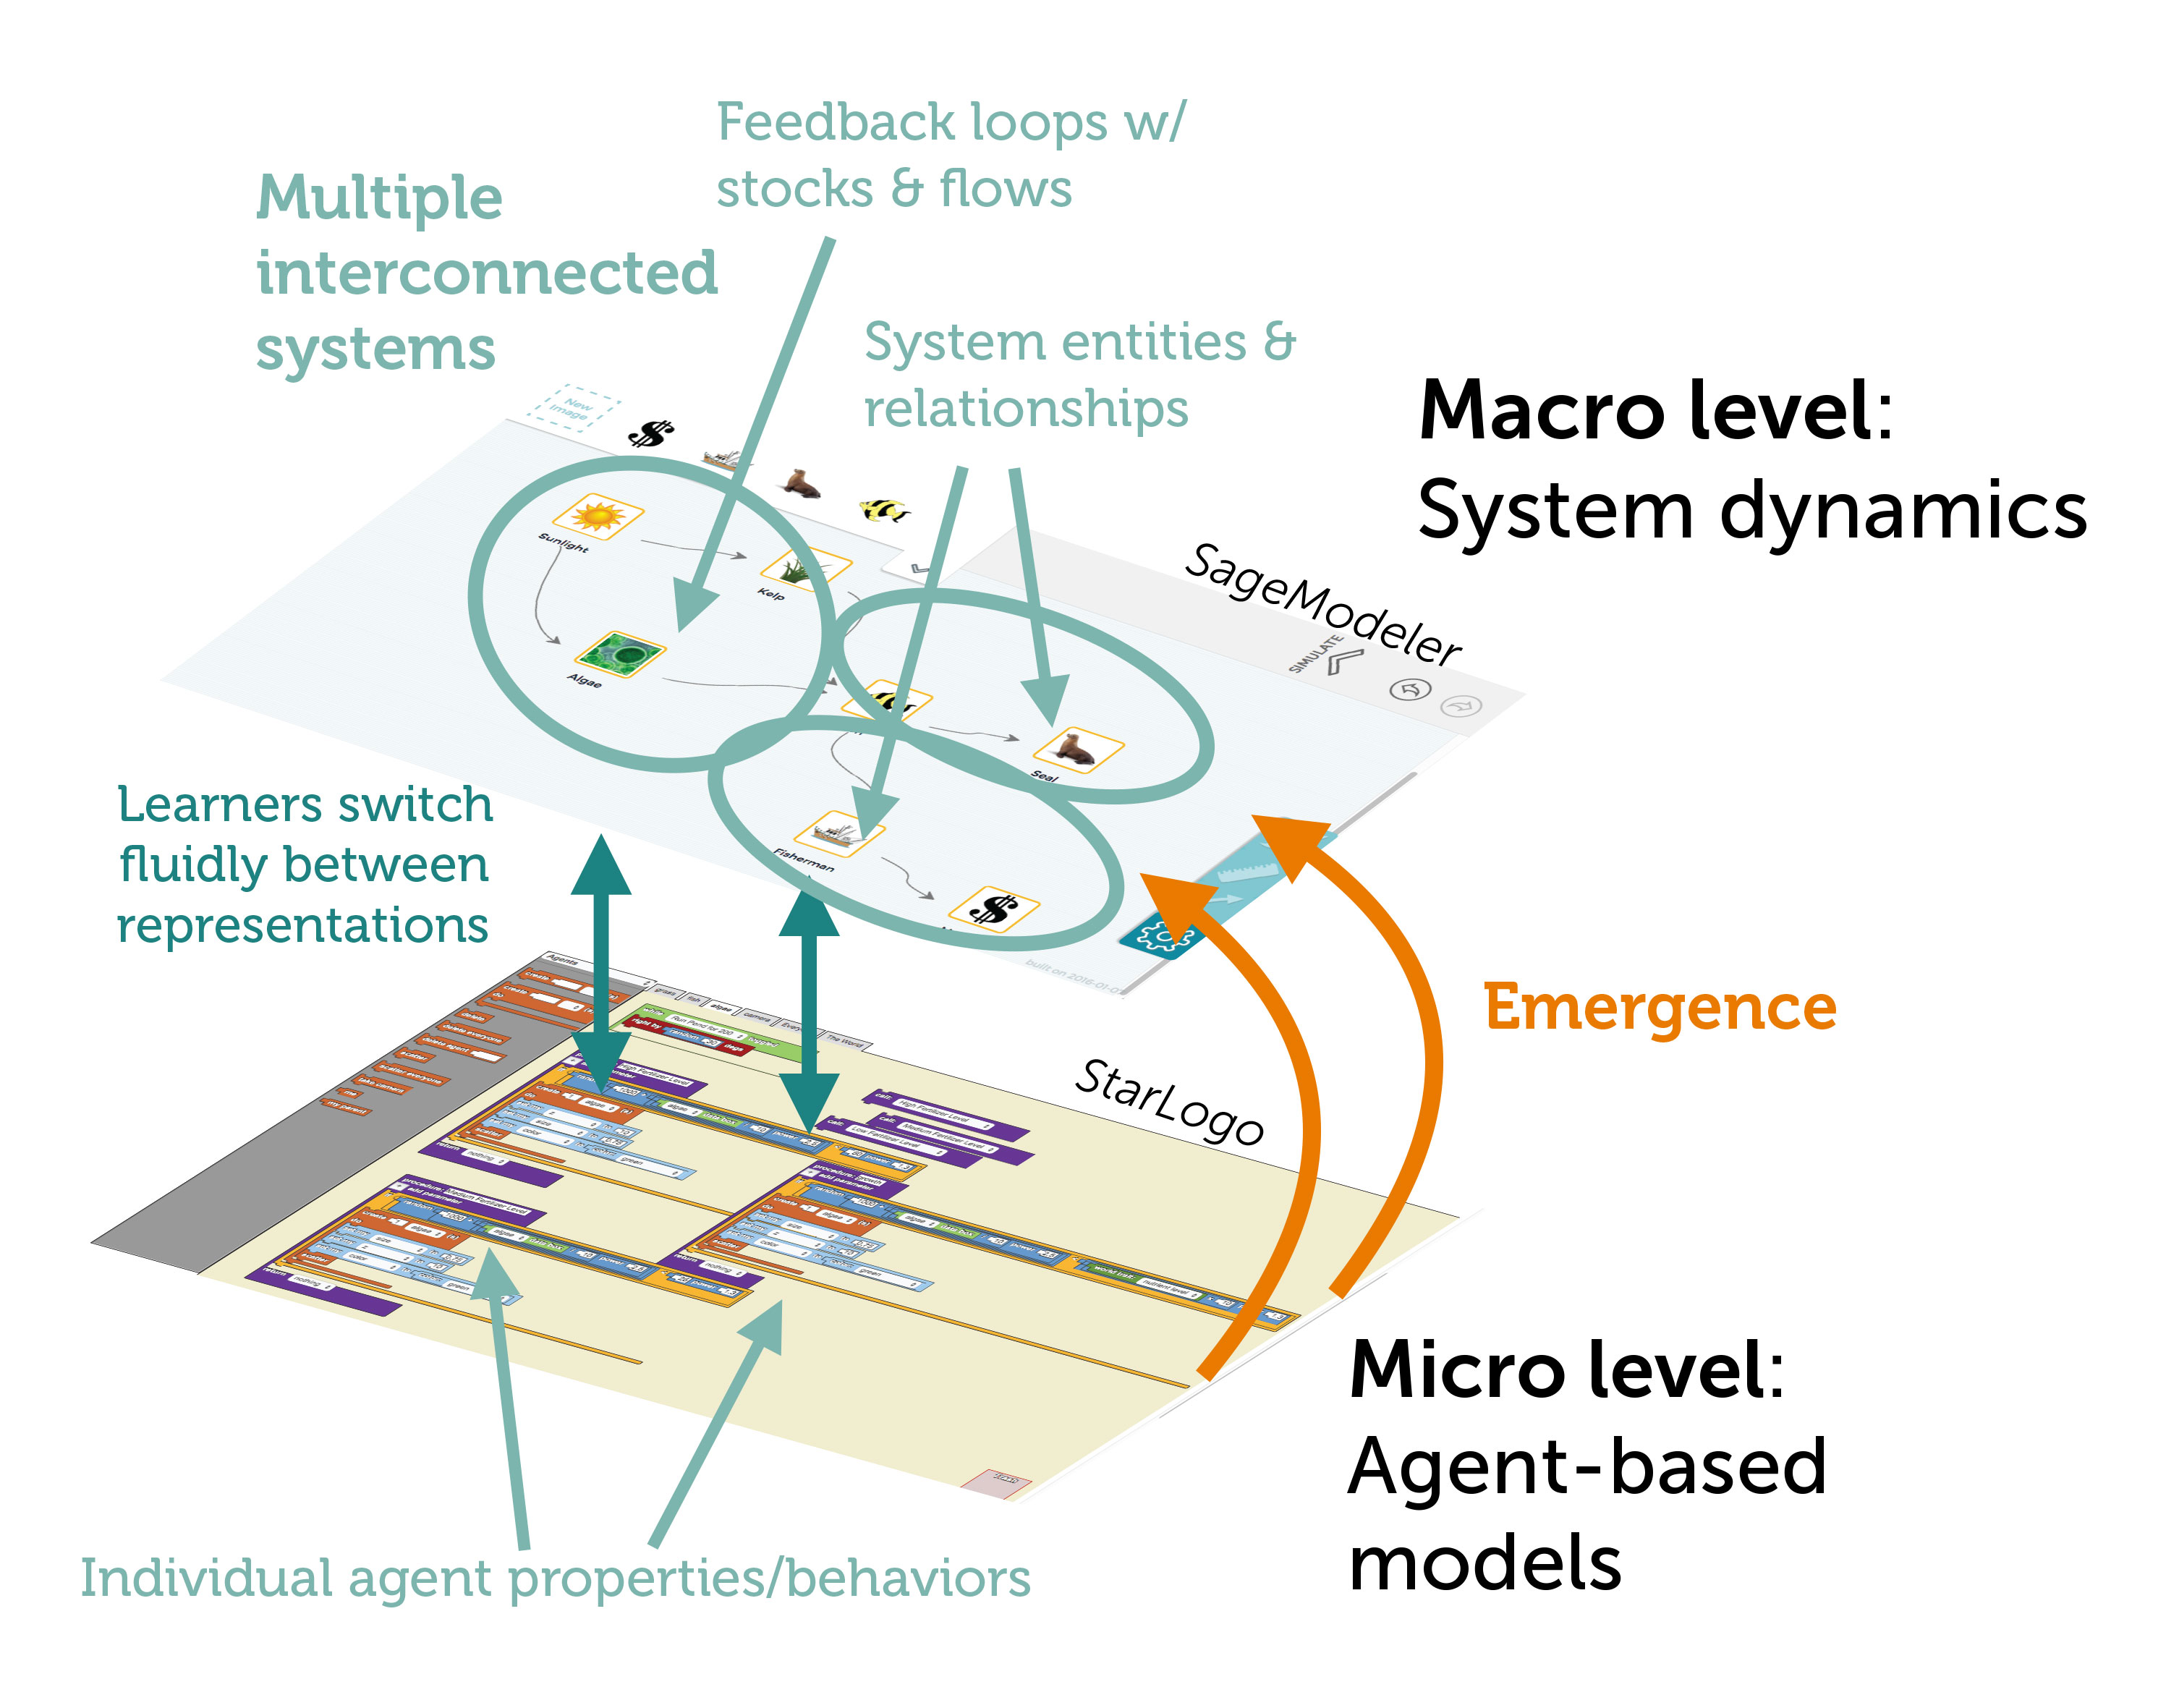 Schematic overview of linked-hybrid modeling perspectives shows both micro and macro views: top down (systems dynamics) and bottom up (agent-based) models.